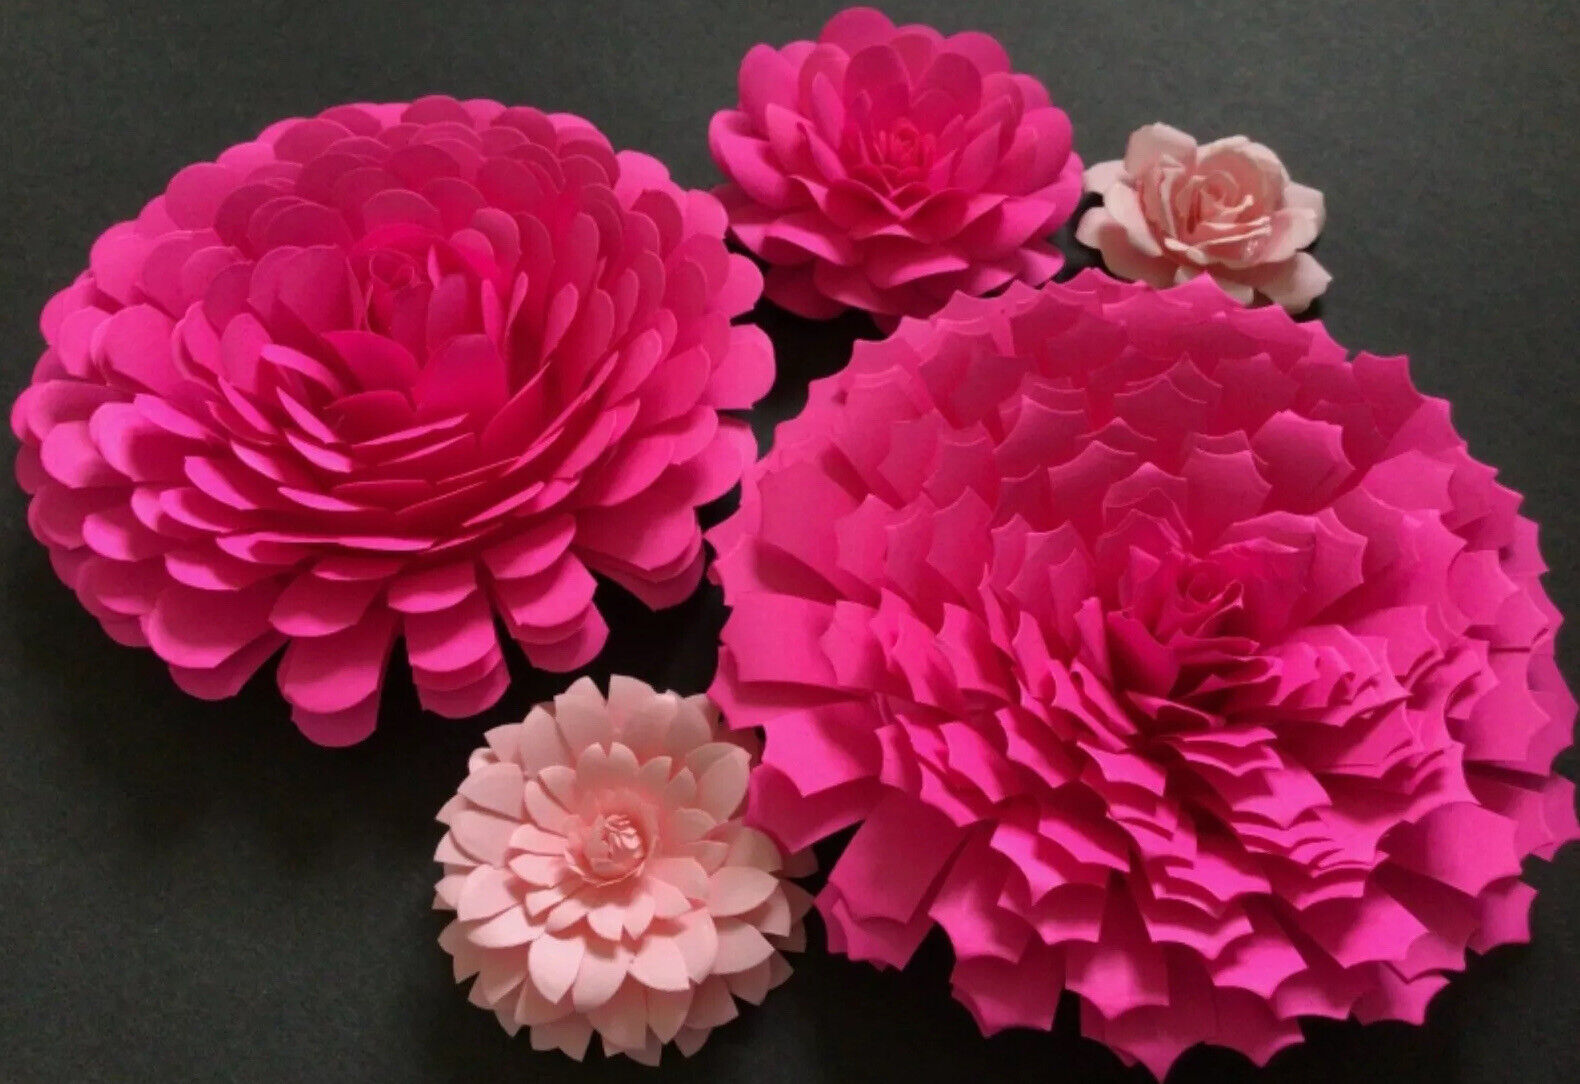 Paper Flowers 3-D Handcrafted 5 pcs Pink DIY Wedding Party Decor Craft Backdrop Unbranded Small Backdrop